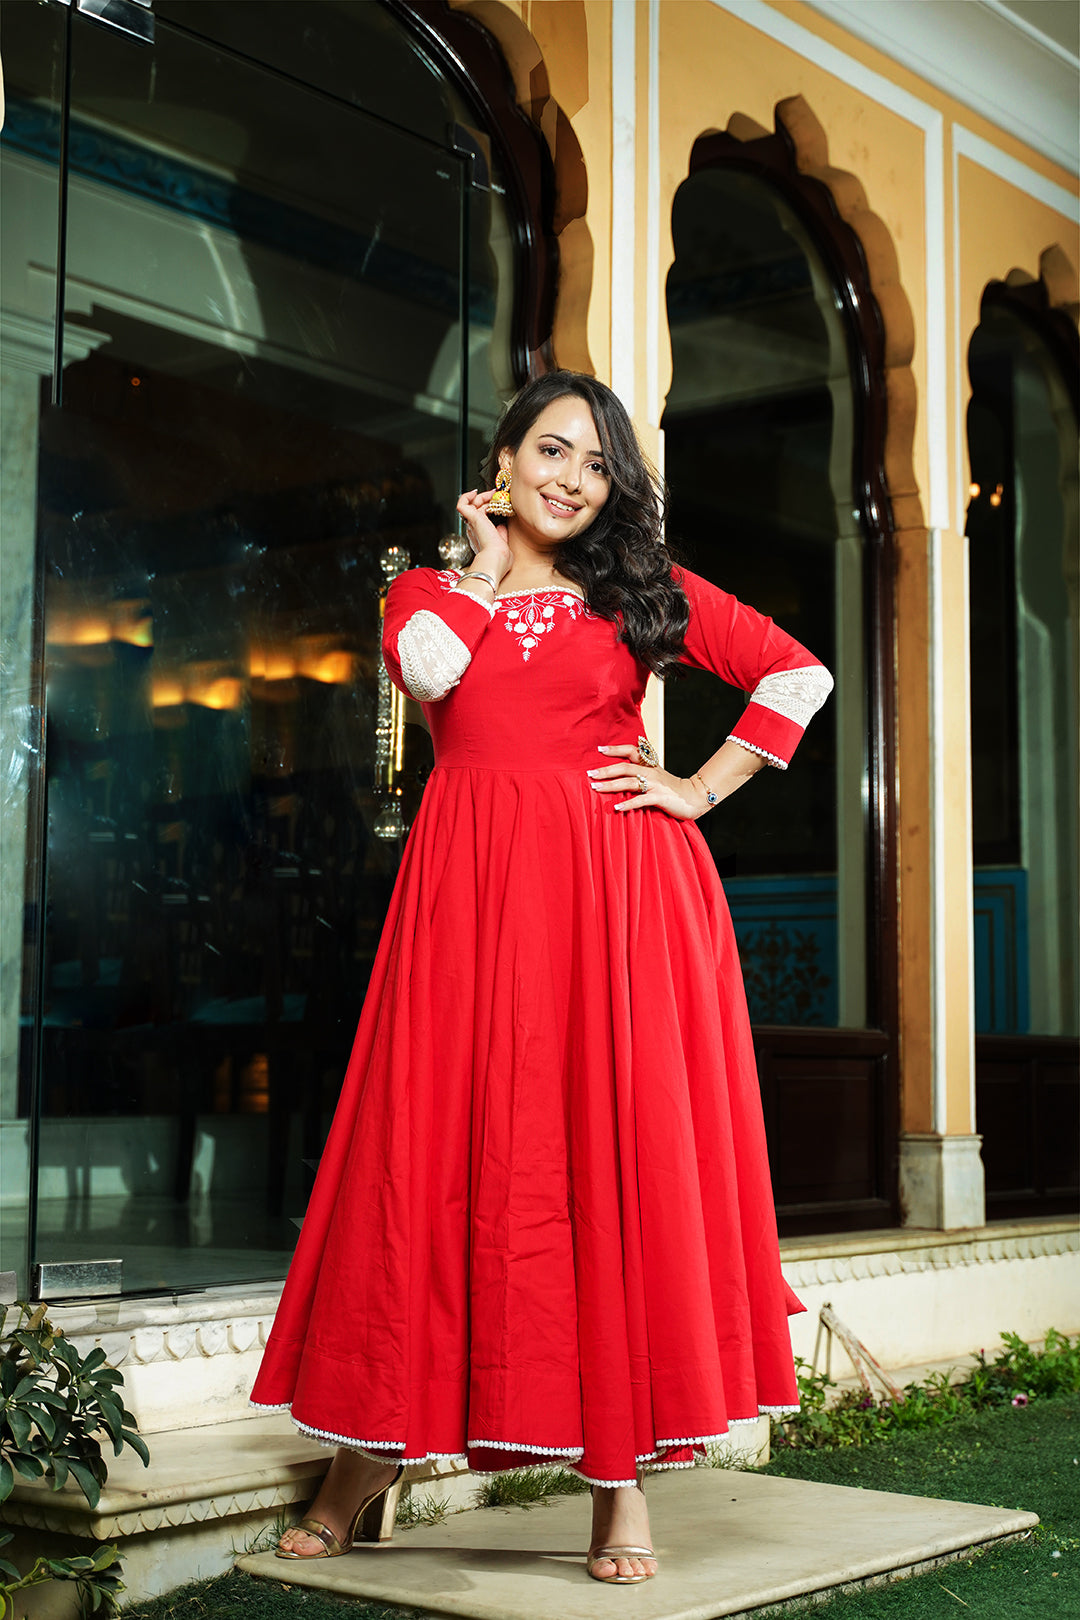 Pleasance Tomato Red Colored Festive Wear Weaving Jacquard Silk Gown